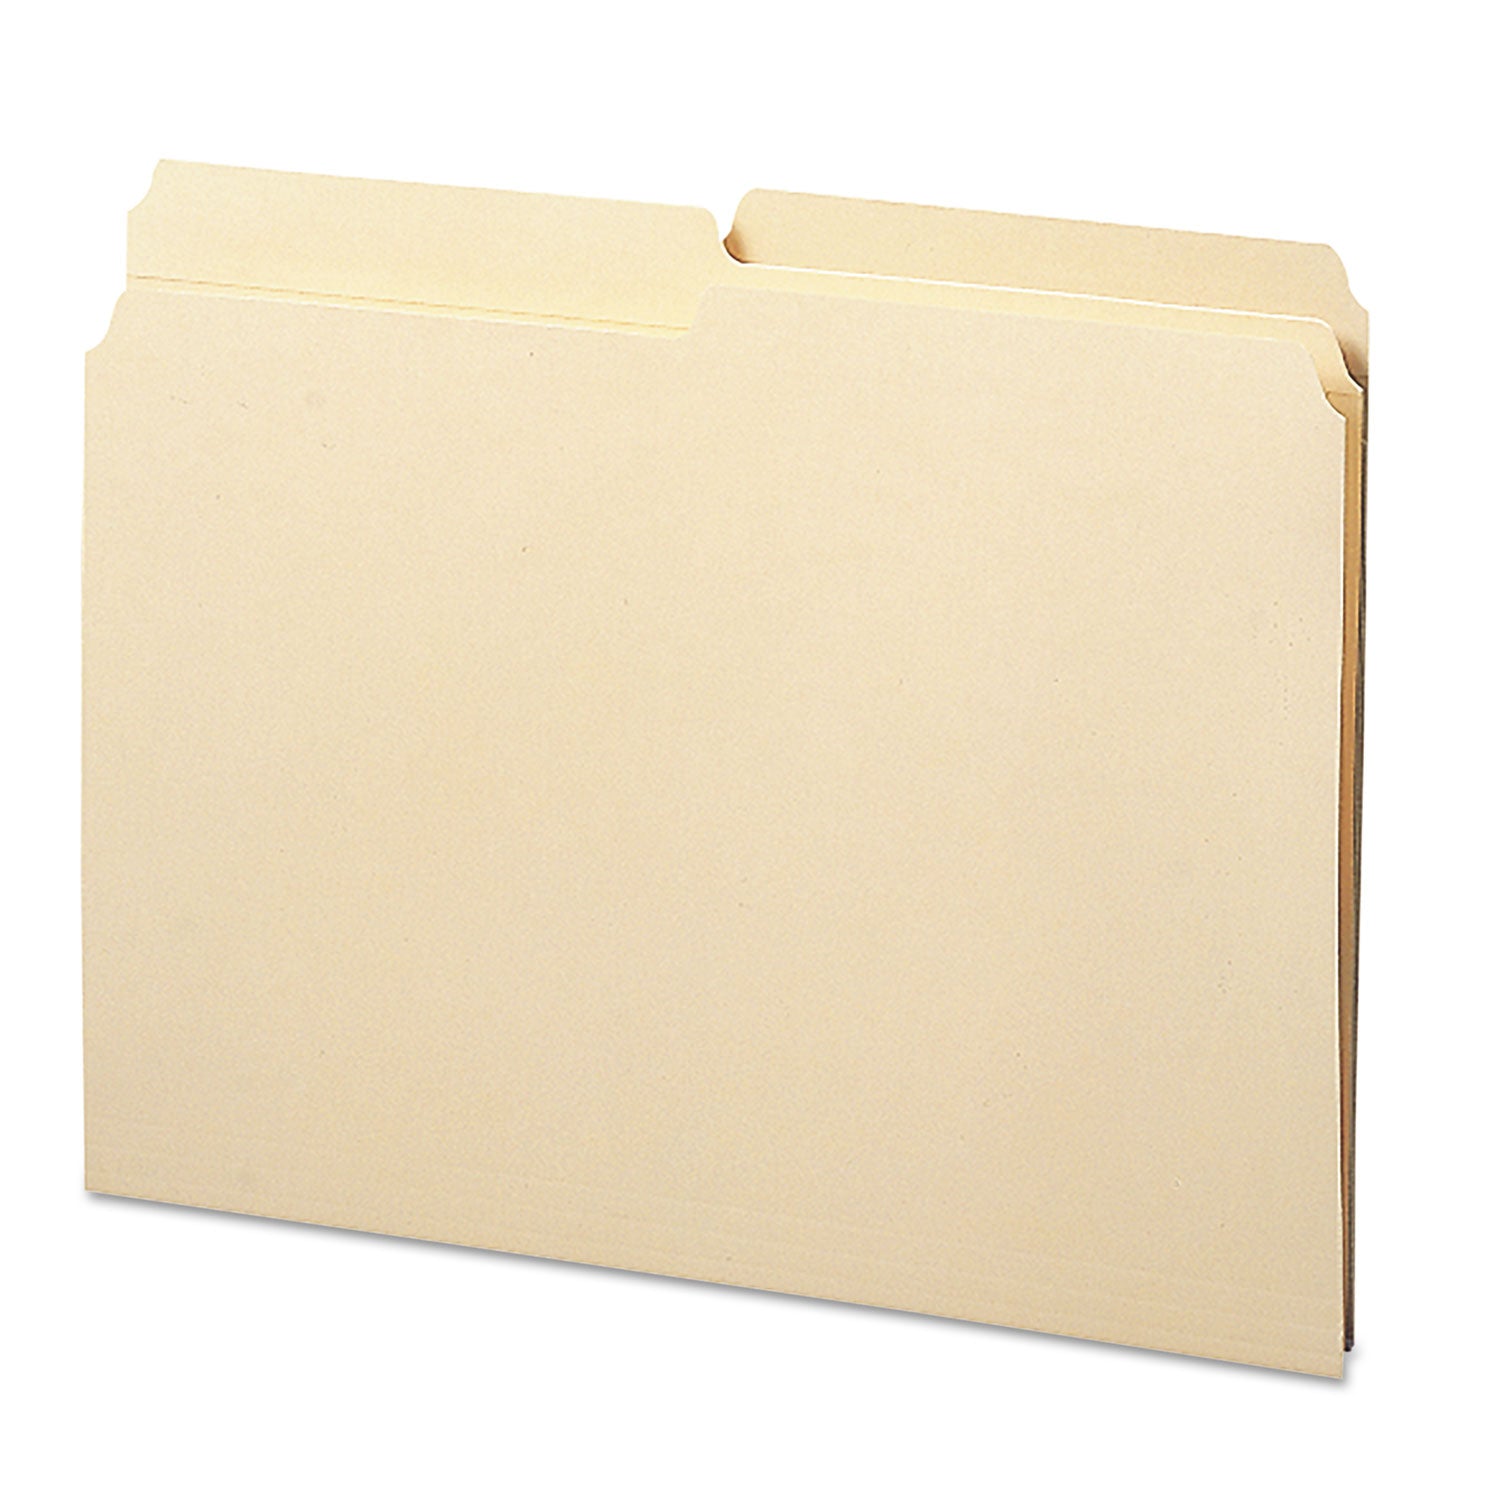 Reinforced Tab Manila File Folders, 1/2-Cut Tabs: Assorted, Letter Size, 0.75" Expansion, 11-pt Manila, 100/Box - 